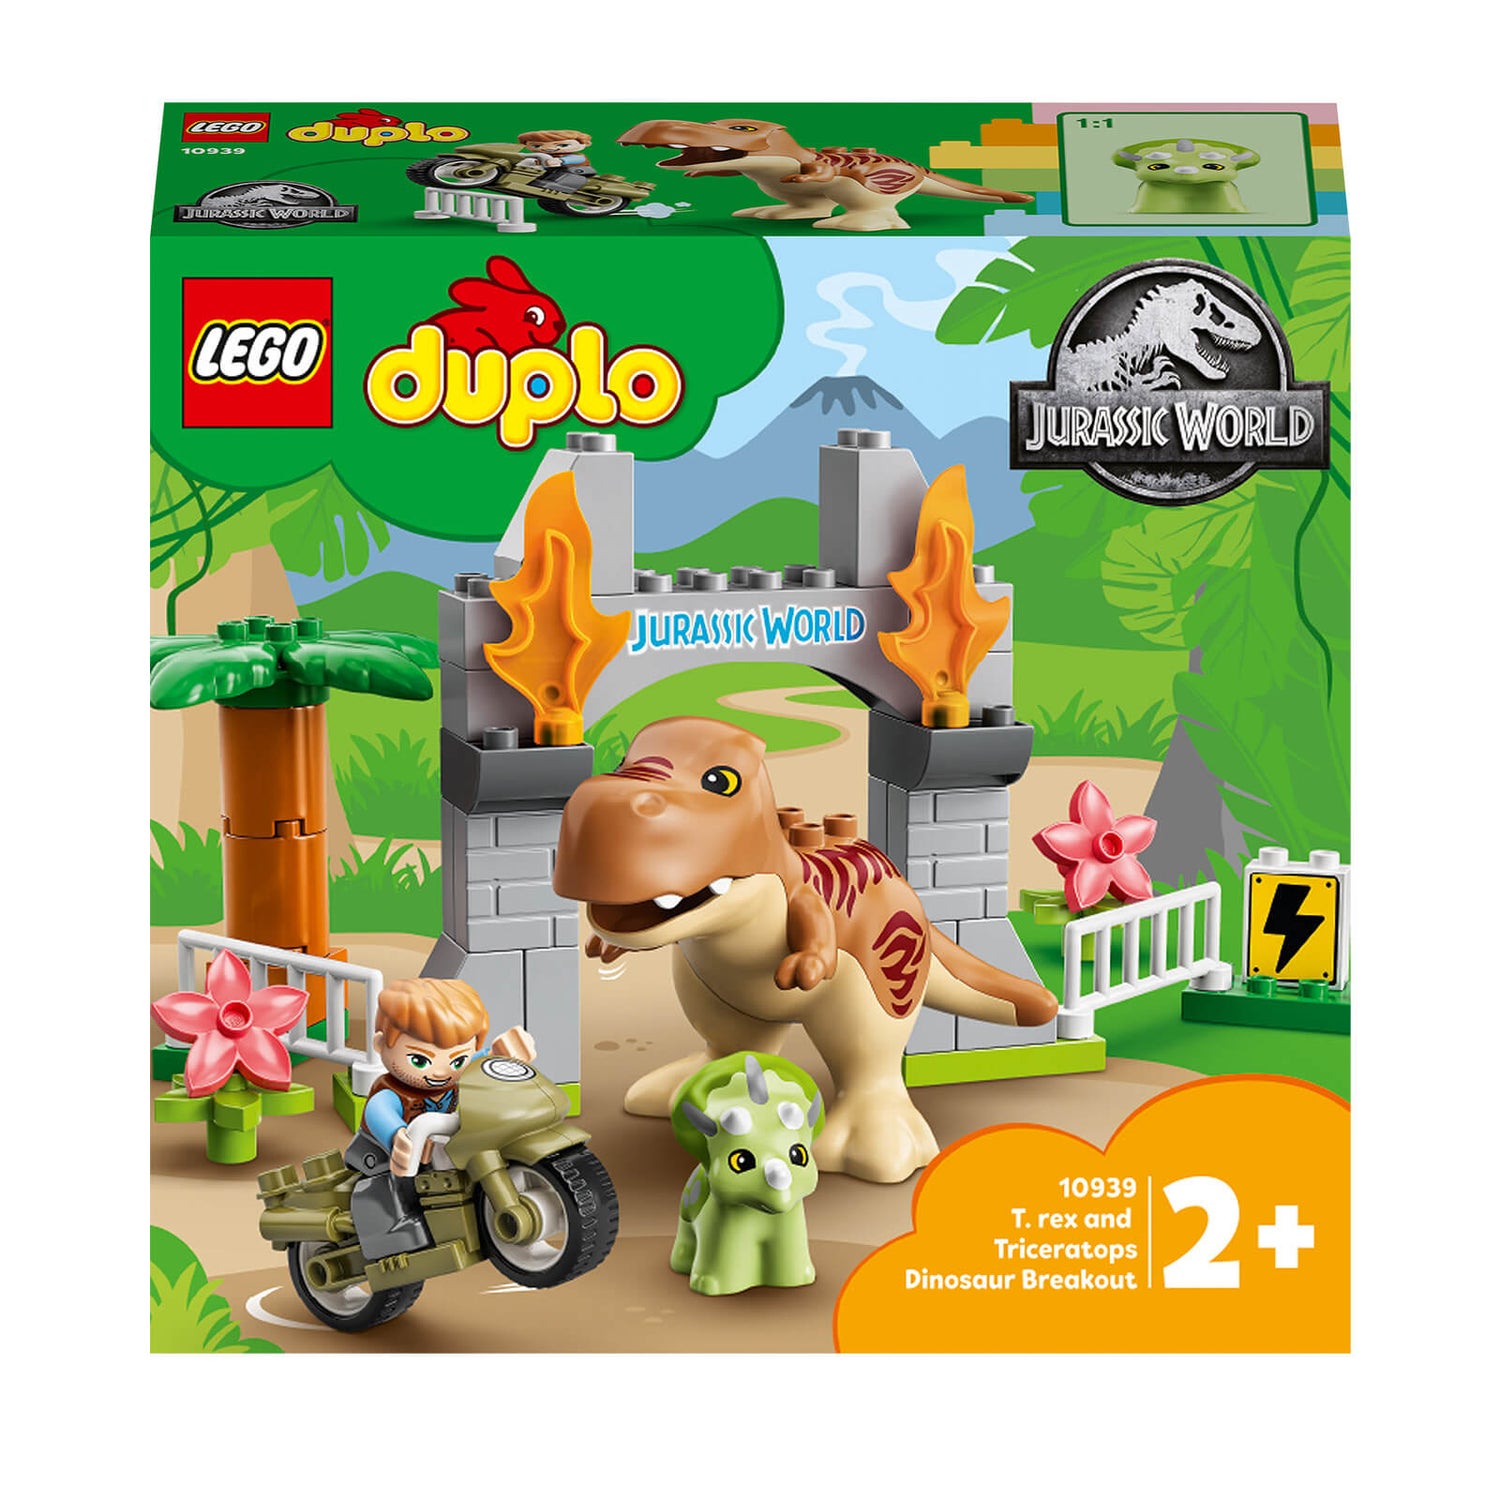 LEGO DUPLO T. rex and Triceratops Dinosaur Toy (10939)